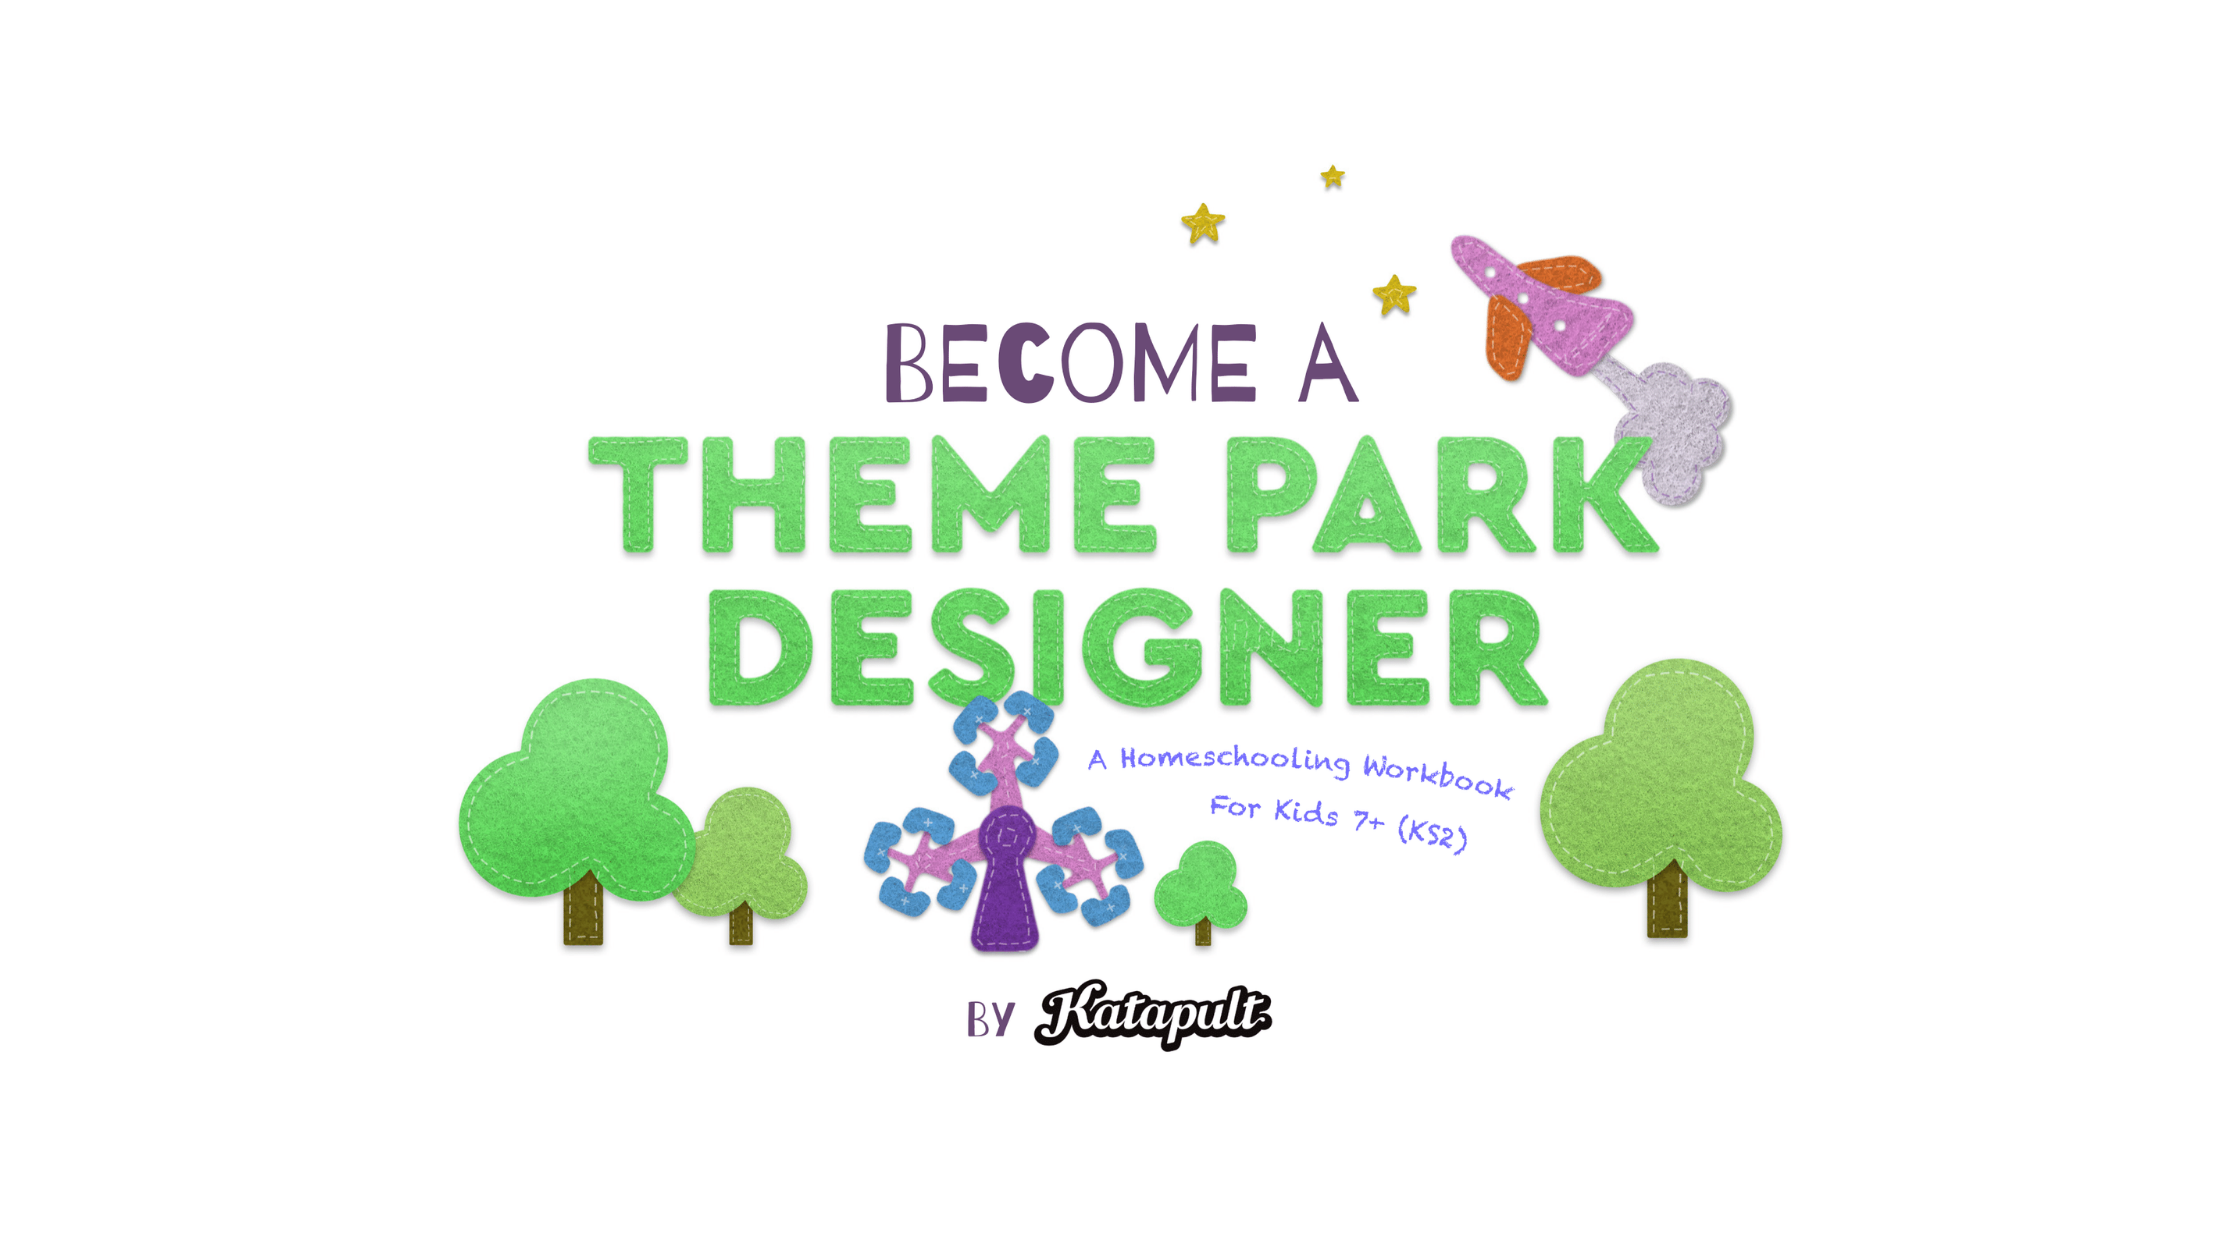 Theme park-inspired workbook launched